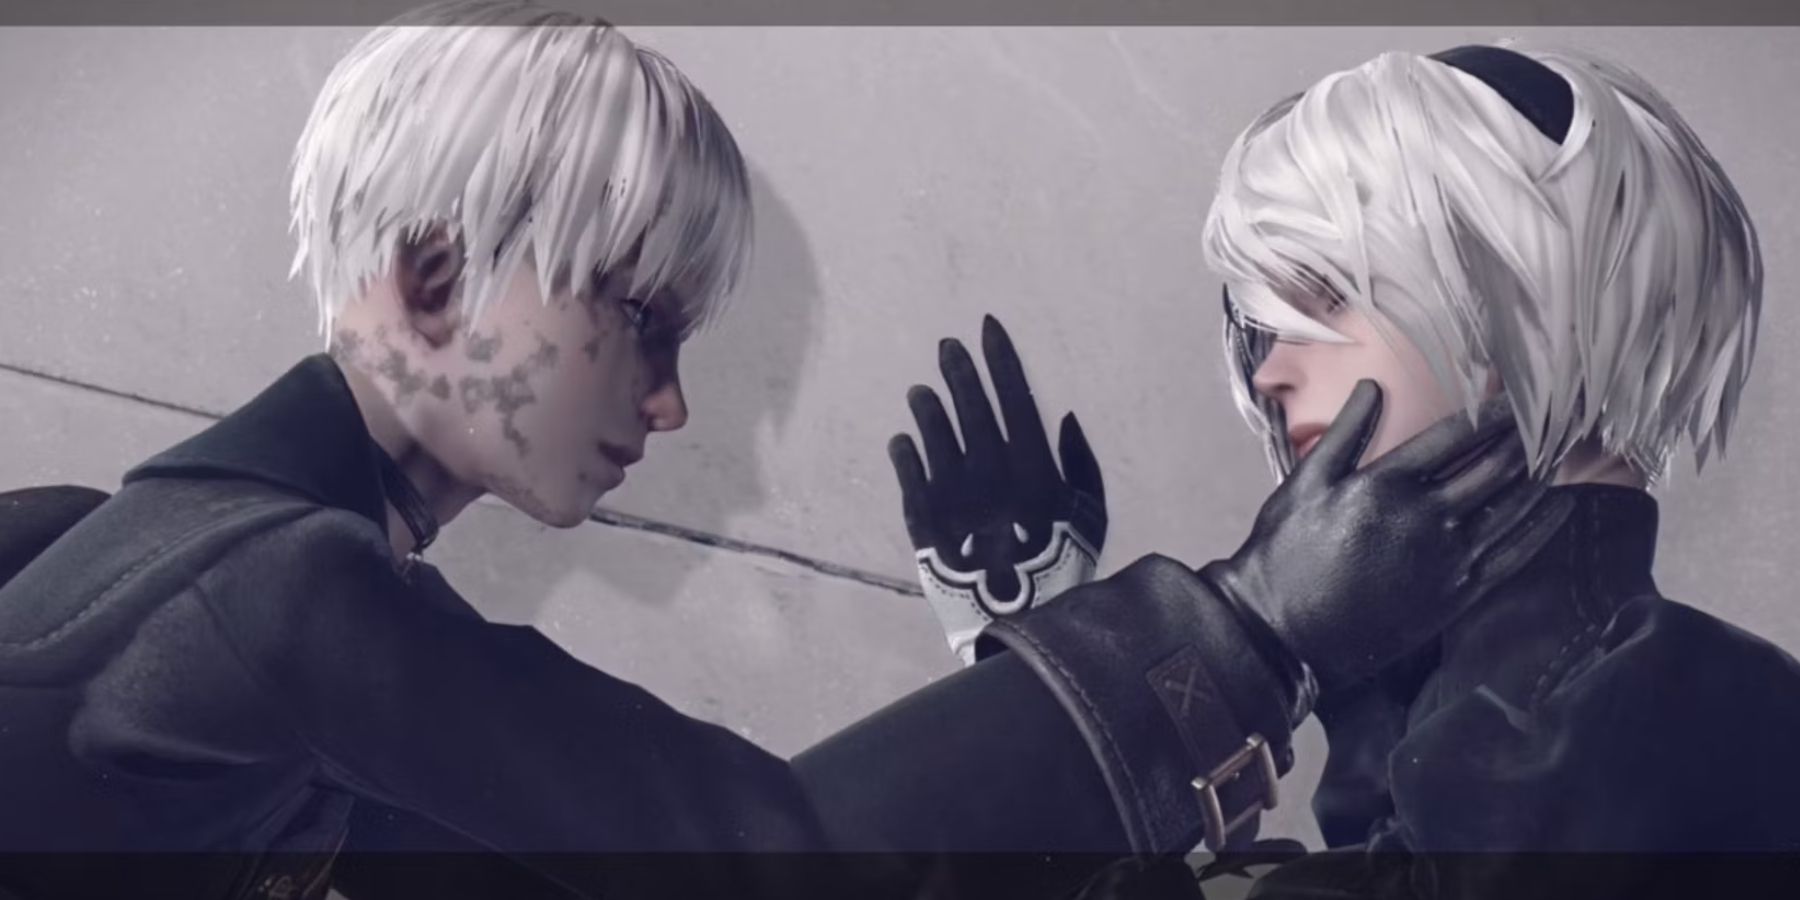 Nier Automata Unmasked 9S and 2B